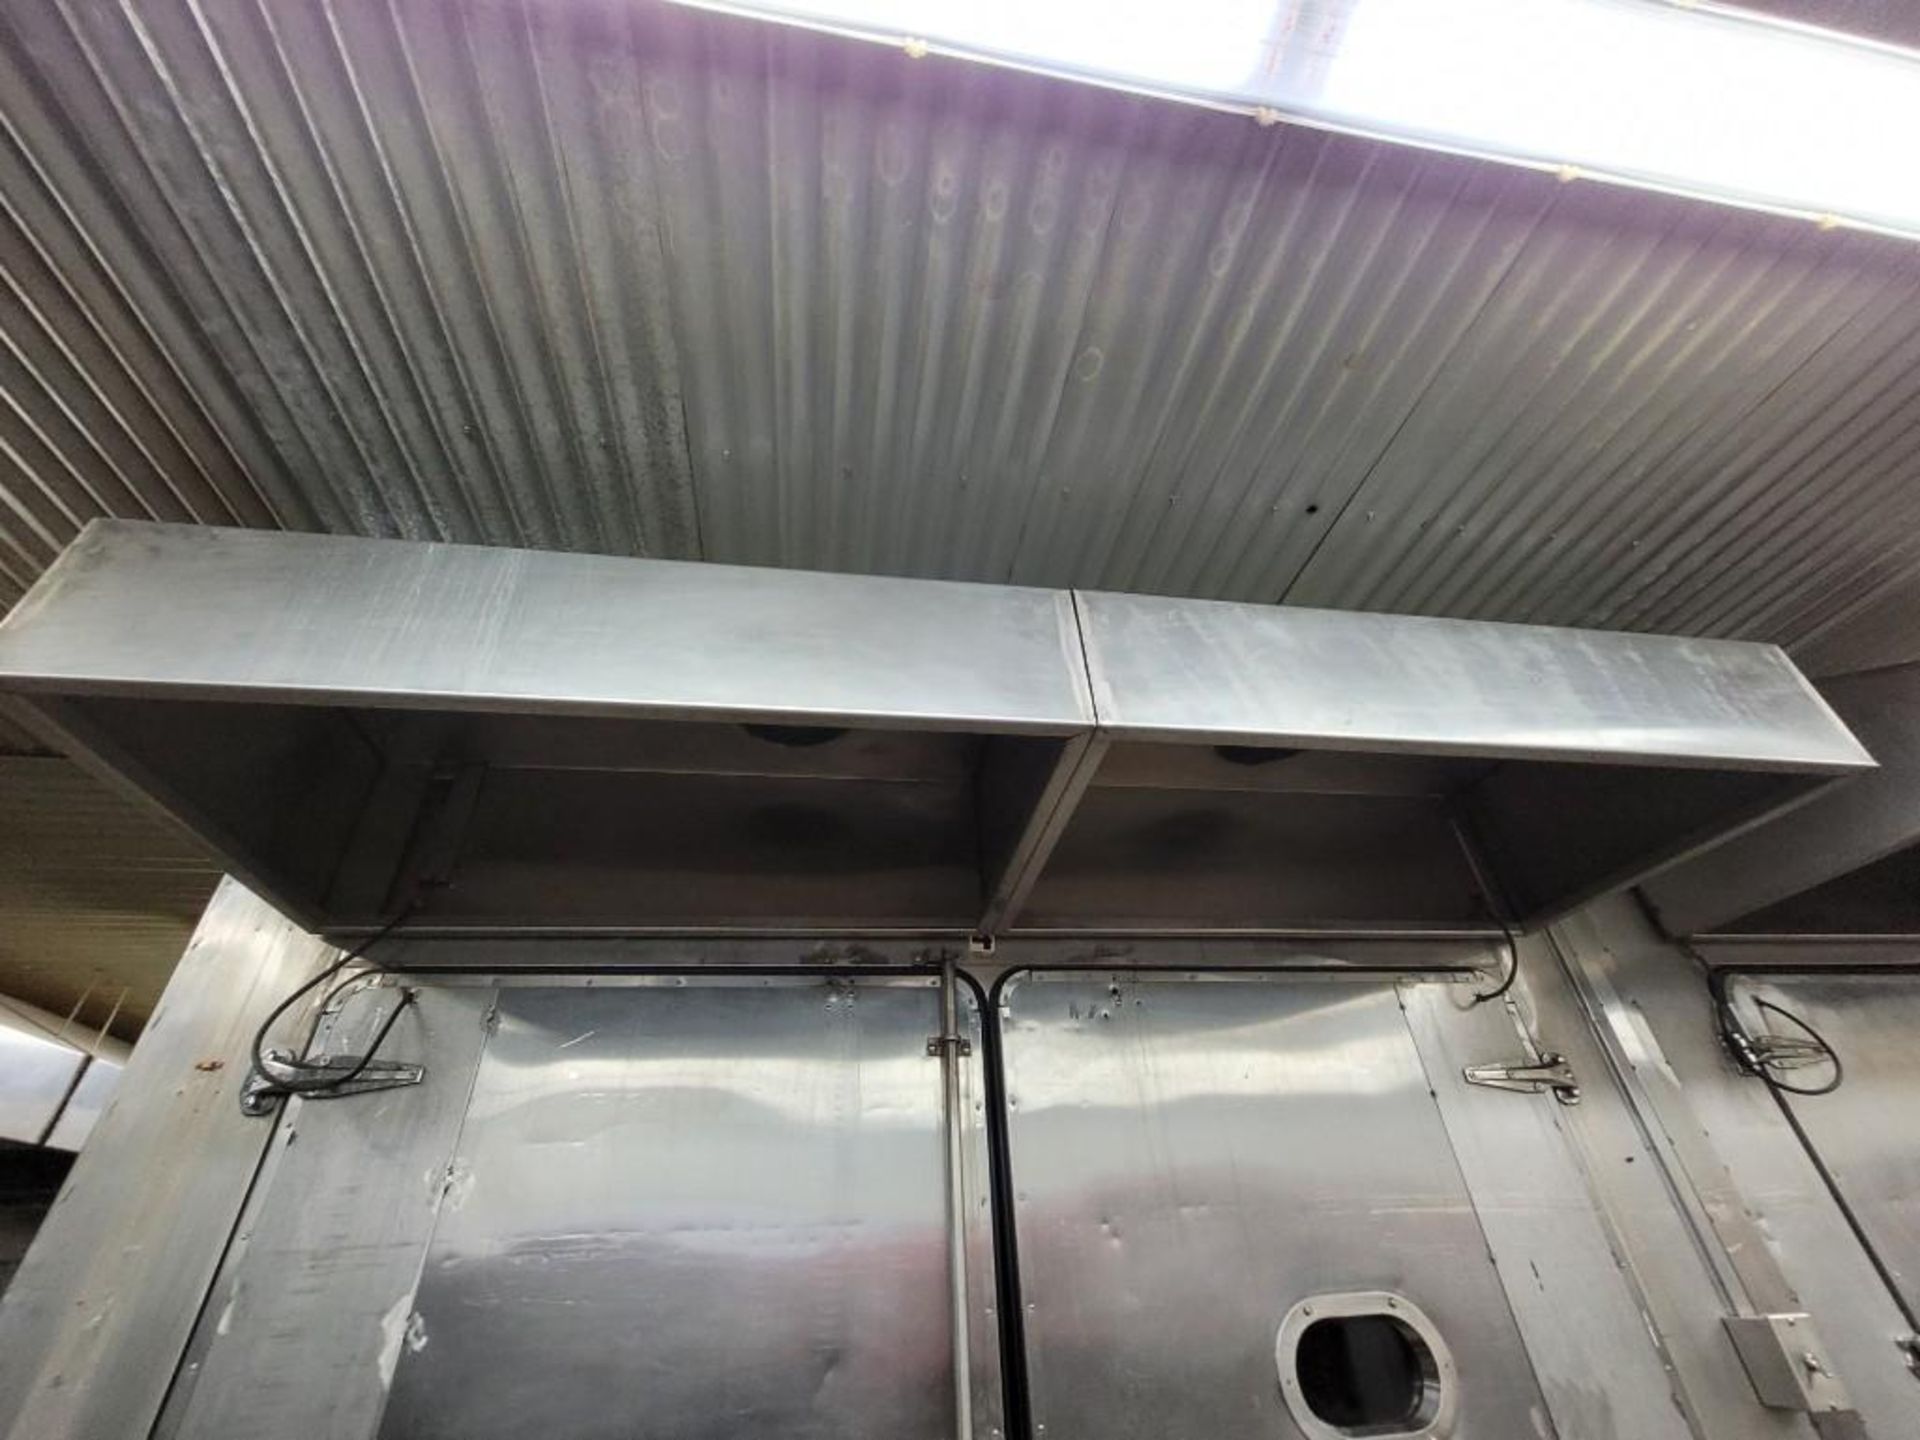 Two Stainless Dual Exhaust Hoods